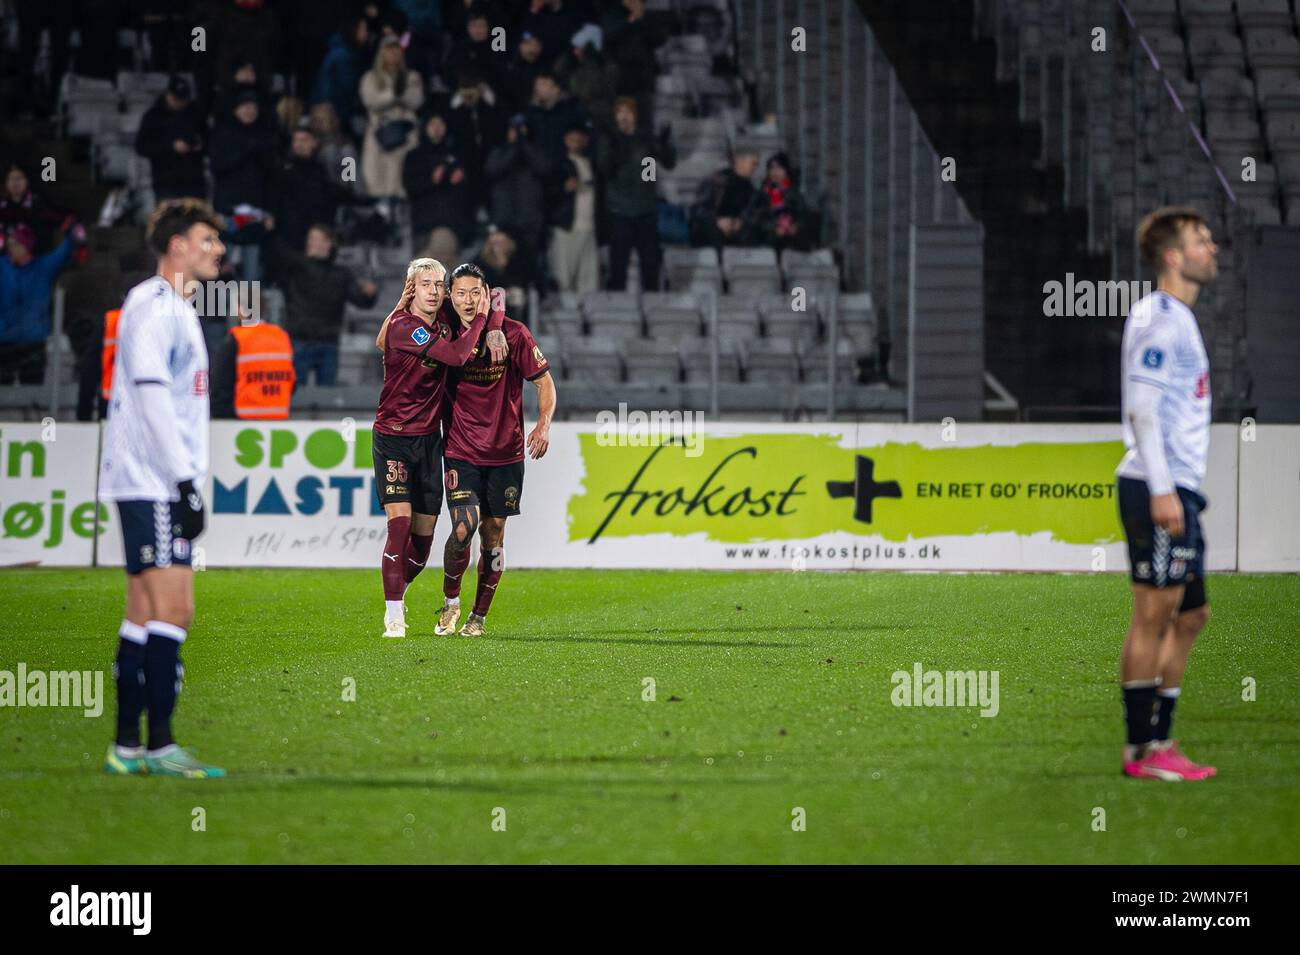 Aarhus, Denmark. 25th, February 2024. Charles (35) of FC Midtjylland scores for 2-3 and celebrates with Cho Gue-sung (10) during the 3F Superliga match between Aarhus GF and FC Midtjylland at Ceres Park in Aarhus. (Photo credit: Gonzales Photo - Morten Kjaer). Stock Photo